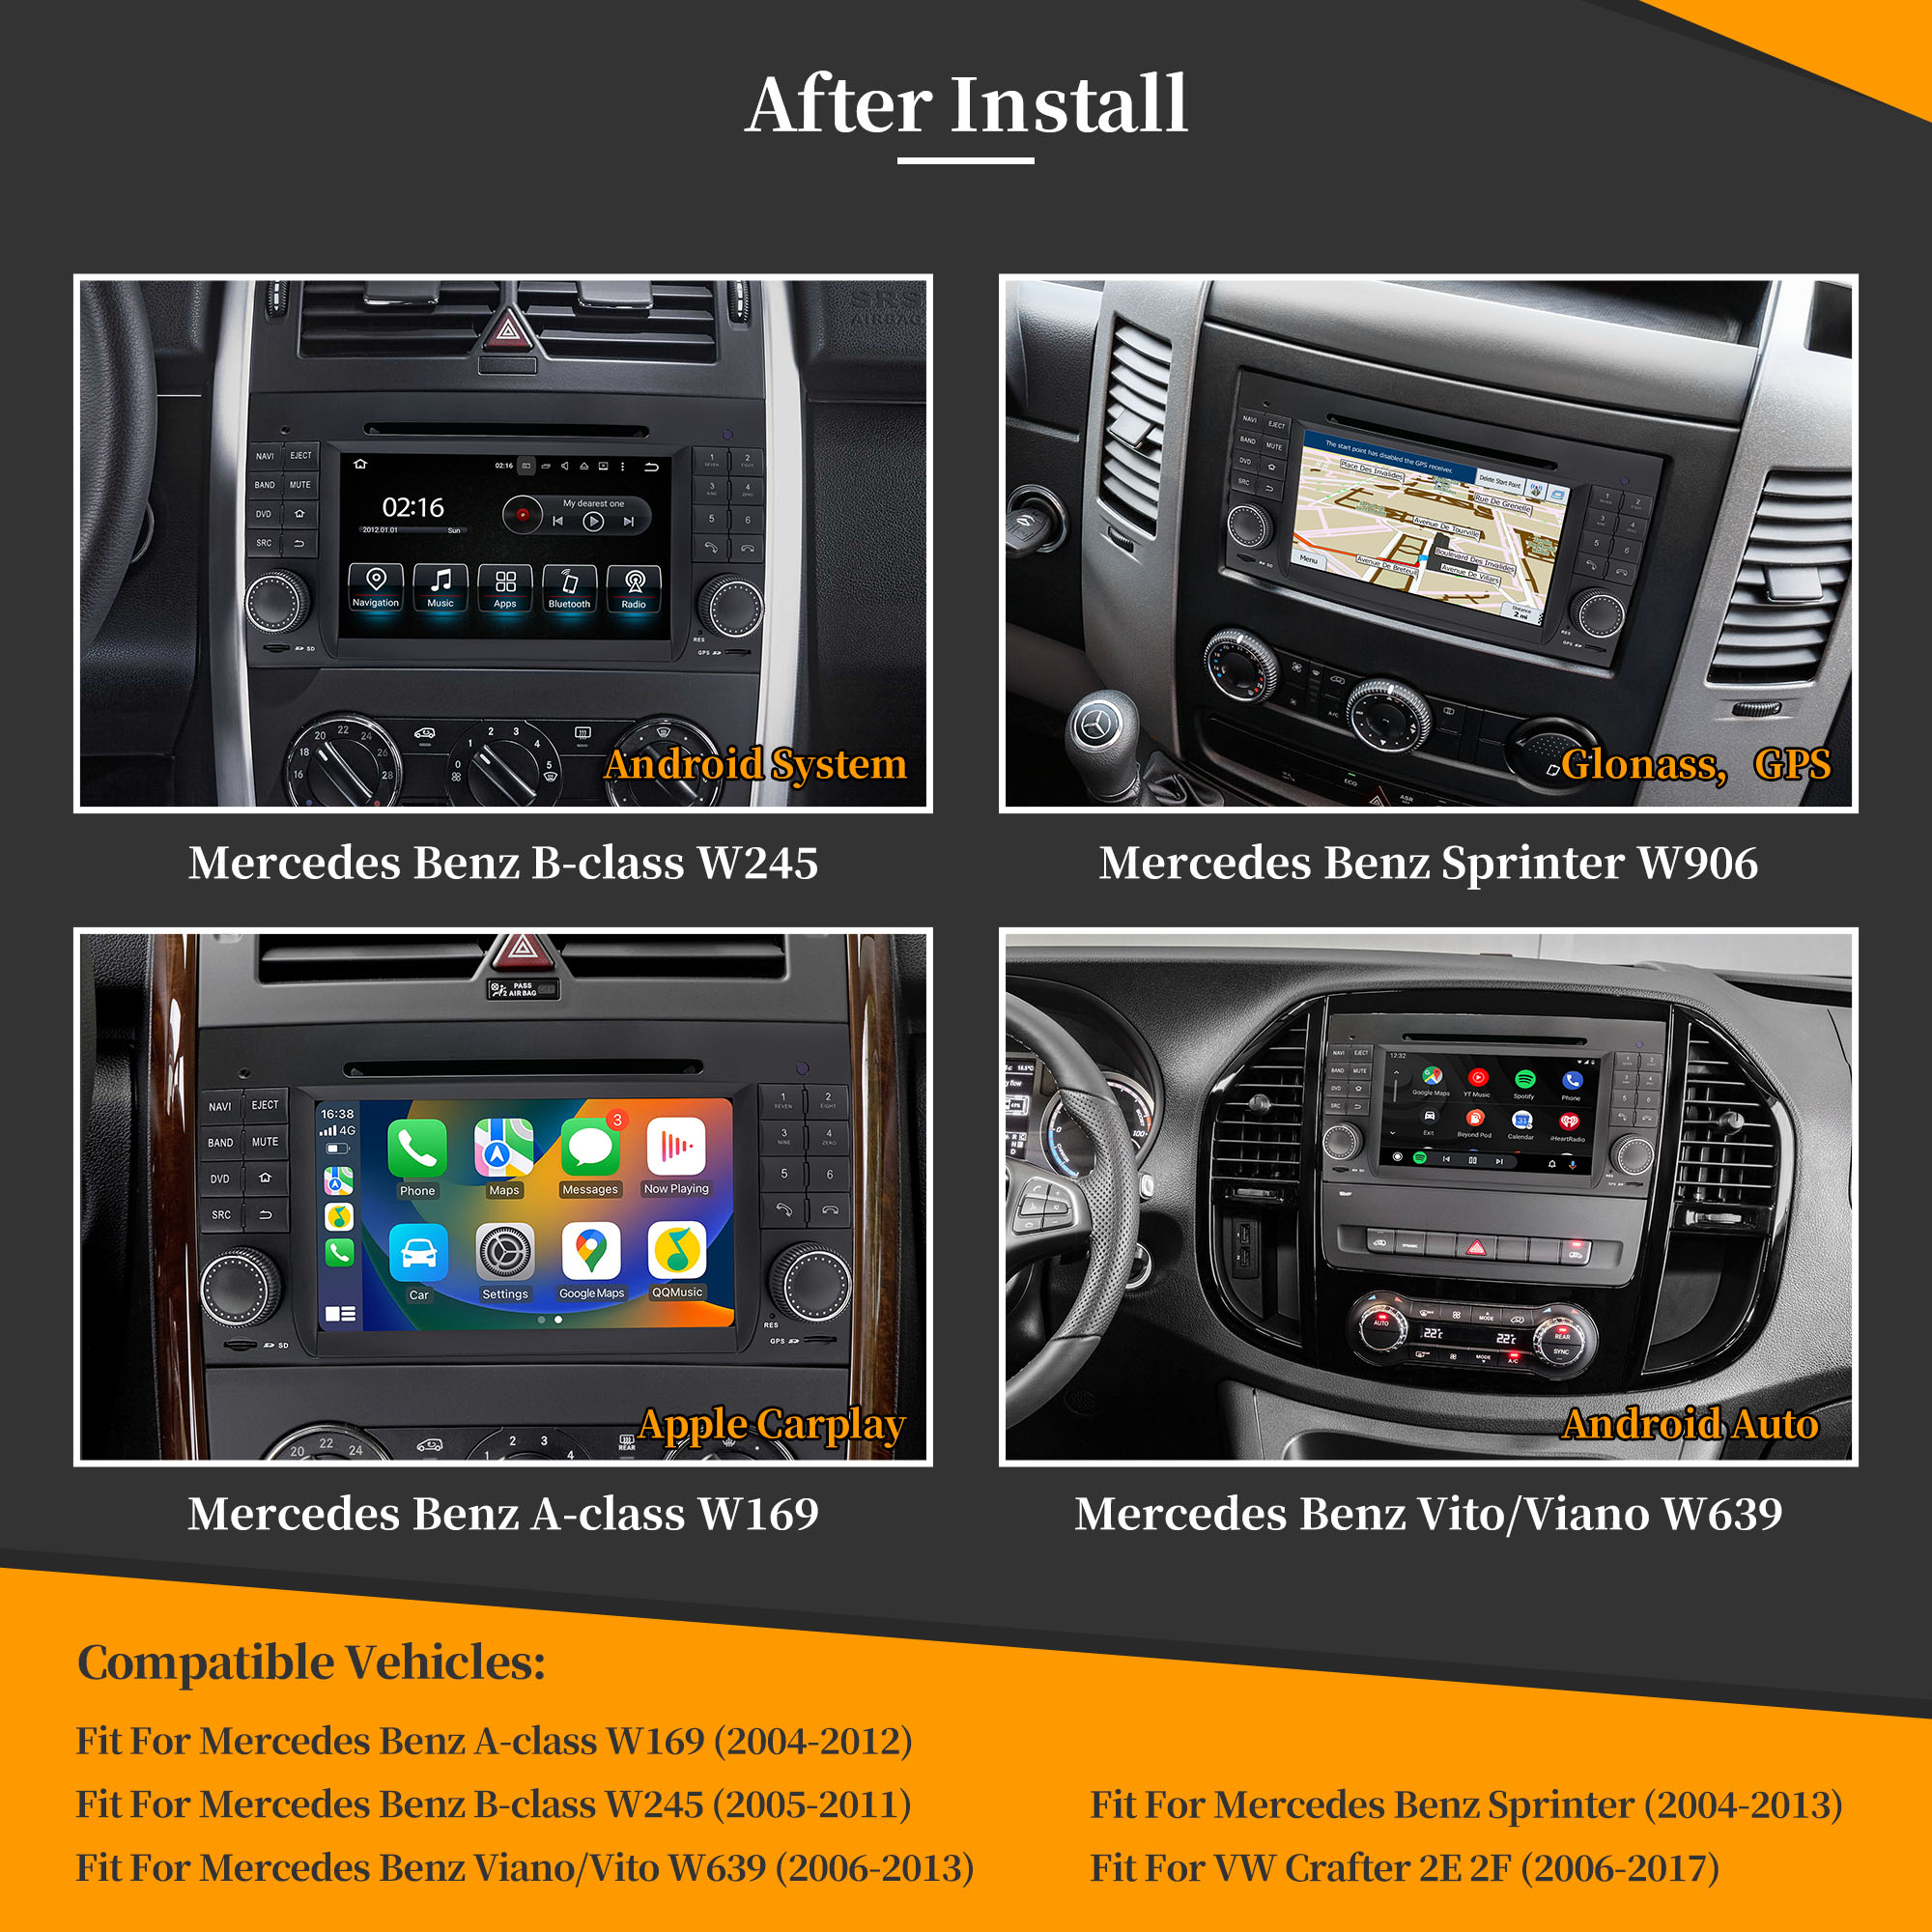 Hualinan Autoradio for Mercedes Sprinter W169 W245 W639 Viano/Vito VW Crafter Stereo Radio Head Unit Upgrade 7"Touch Screen DVD Apple CarPlay Android Auto Replacement Aftermarket Navigation Bluetooth